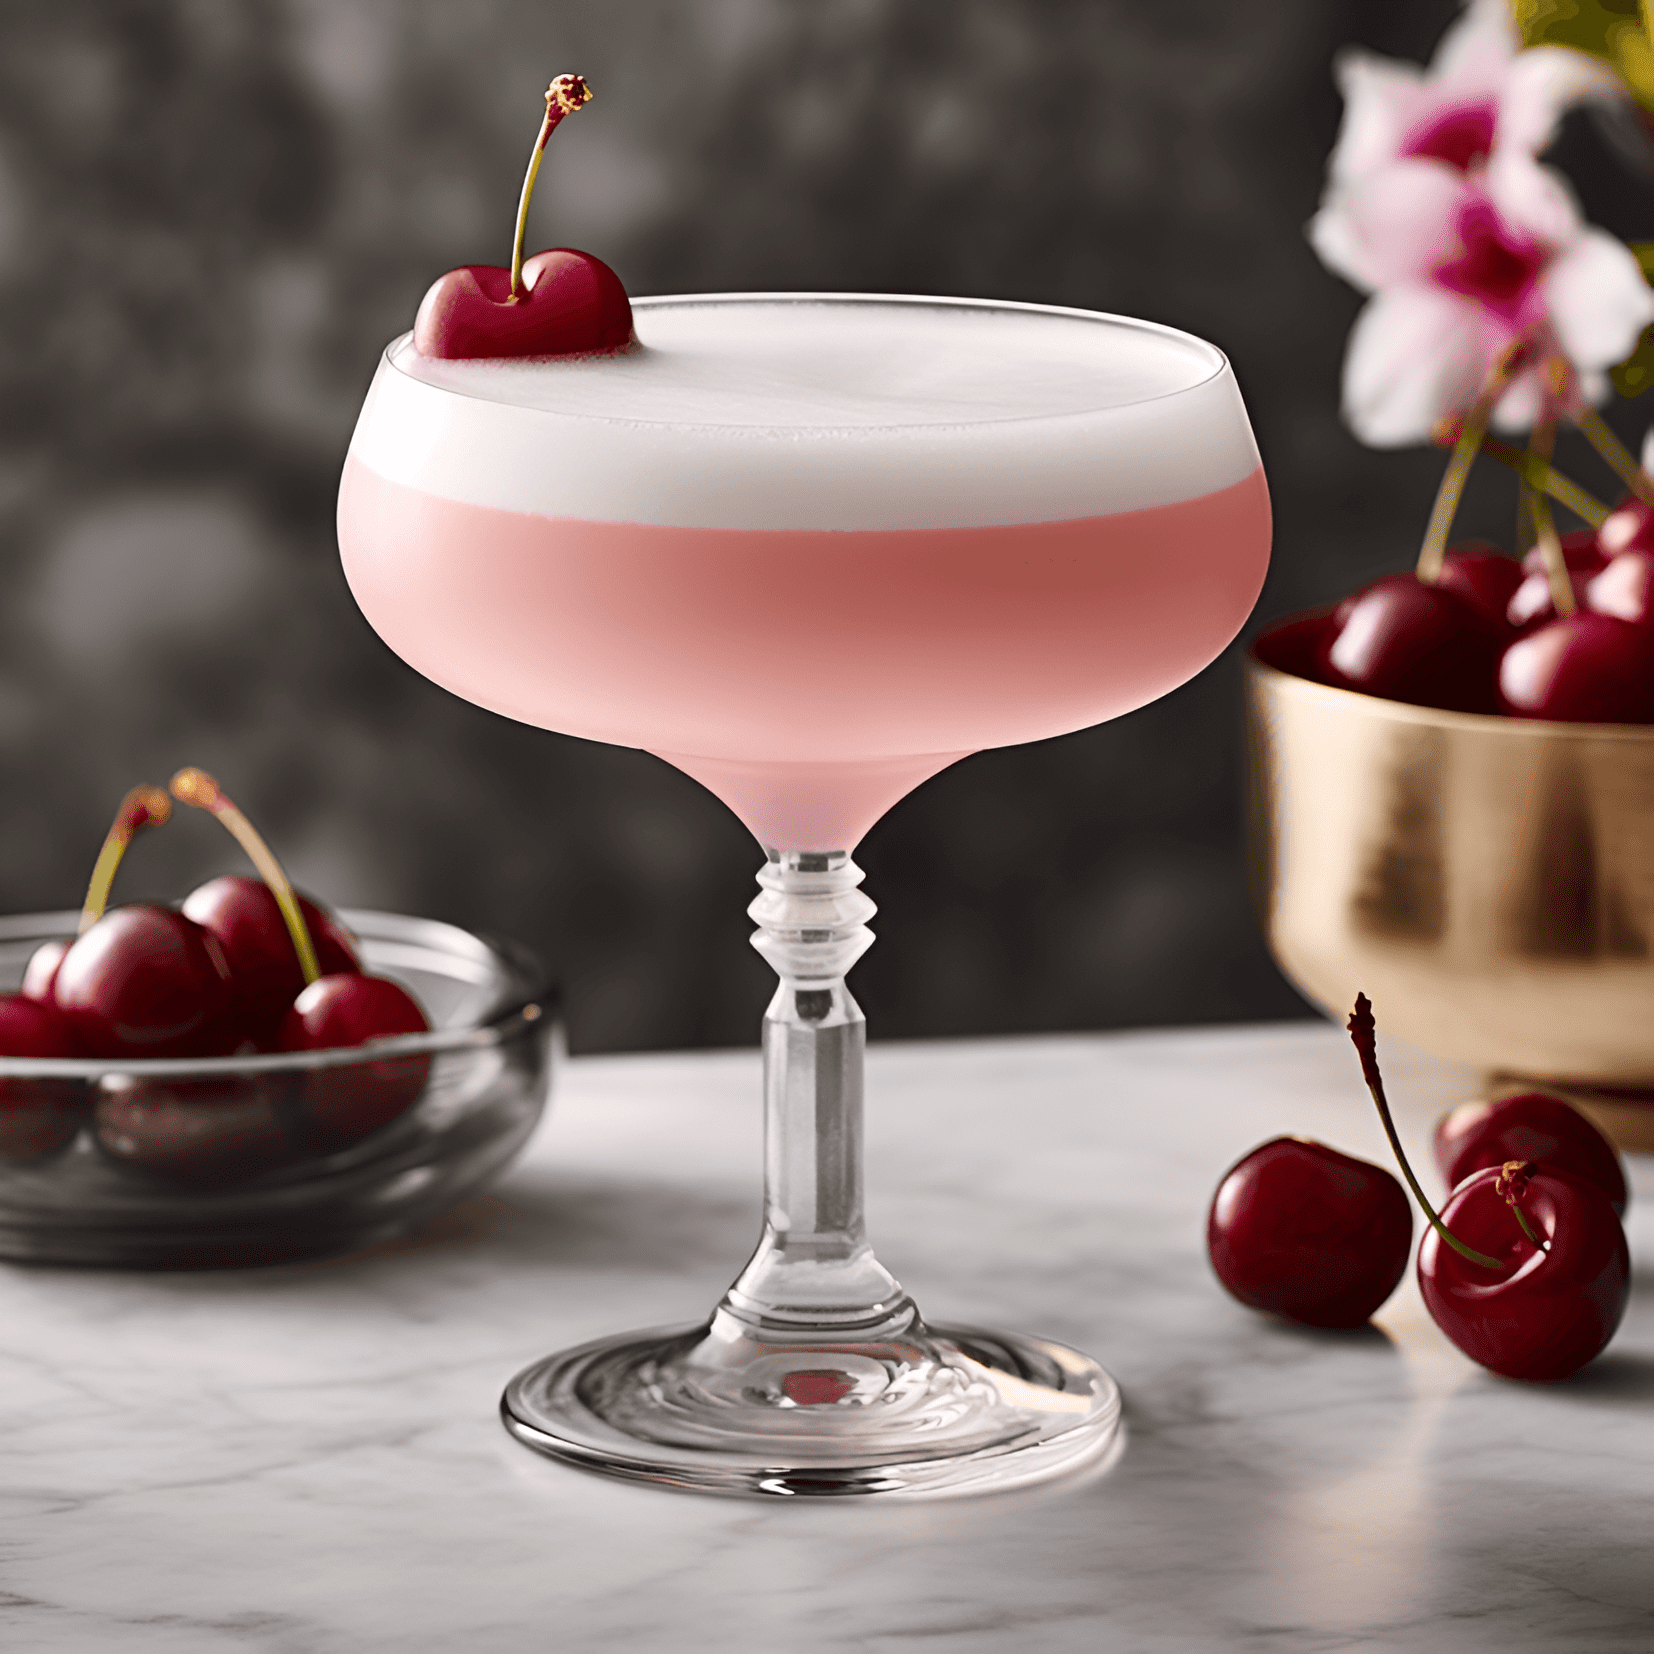 Pink Lady Cocktail Recipe - The Pink Lady has a delicate, fruity, and slightly sweet taste with a hint of tartness. The gin provides a subtle, herbal undertone, while the grenadine and egg white create a smooth, velvety texture.